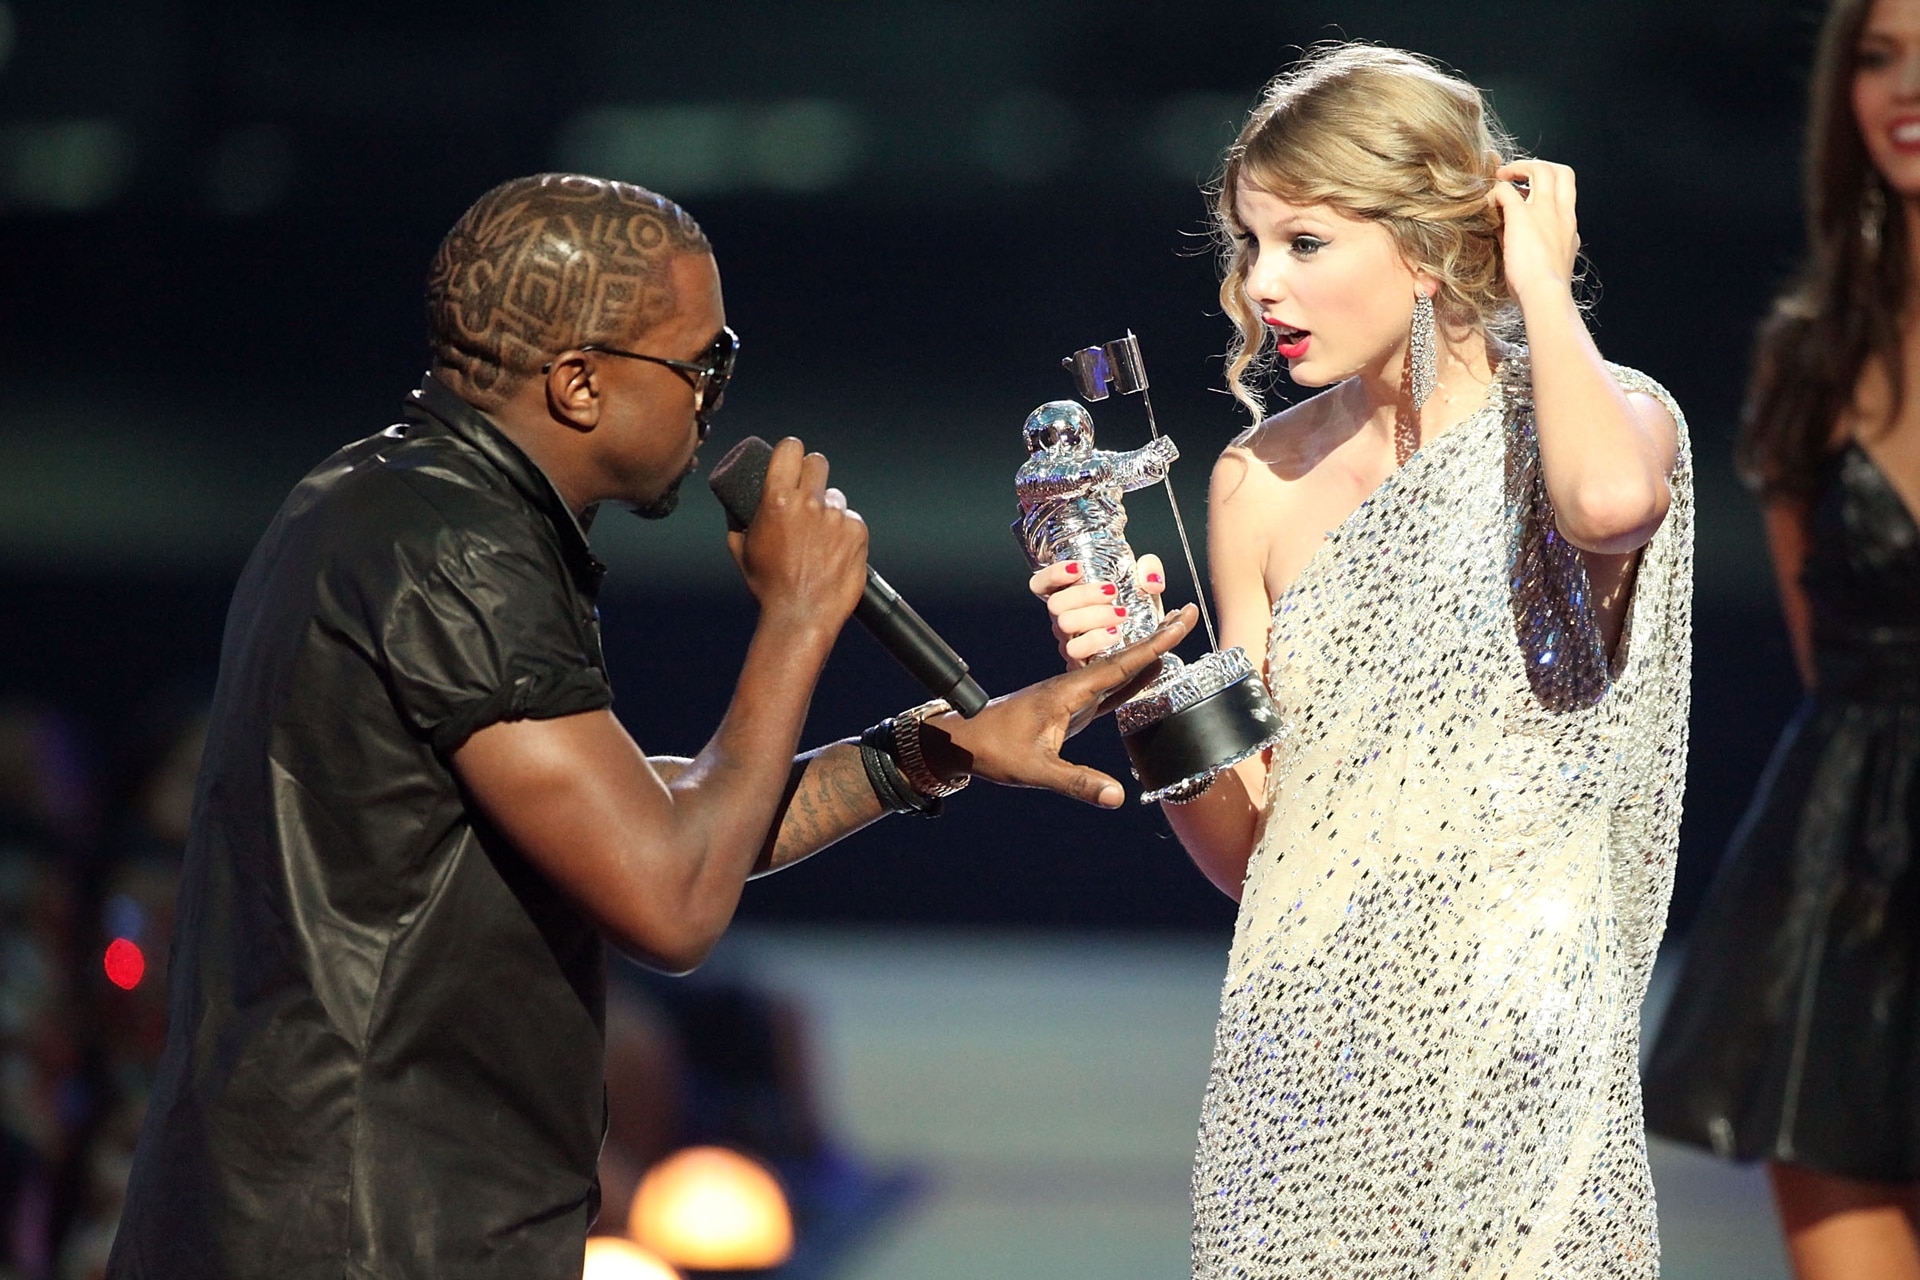 Taylor Swift May Have Just Reignited Her Feud With Kanye West